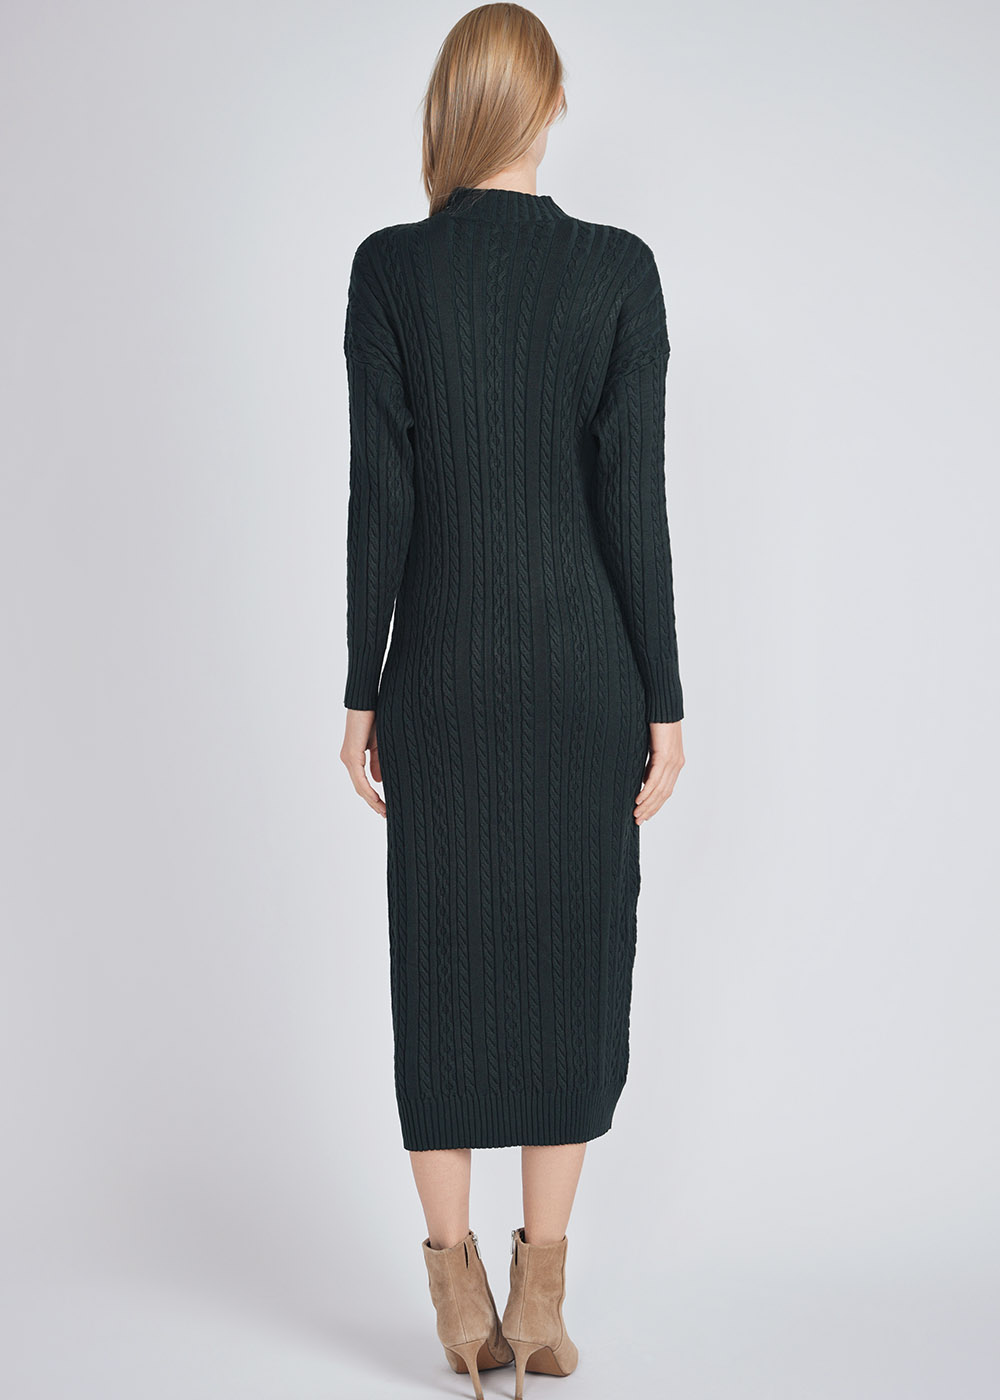 Warmth & Style: Green Cable Knit Dress with Buttons